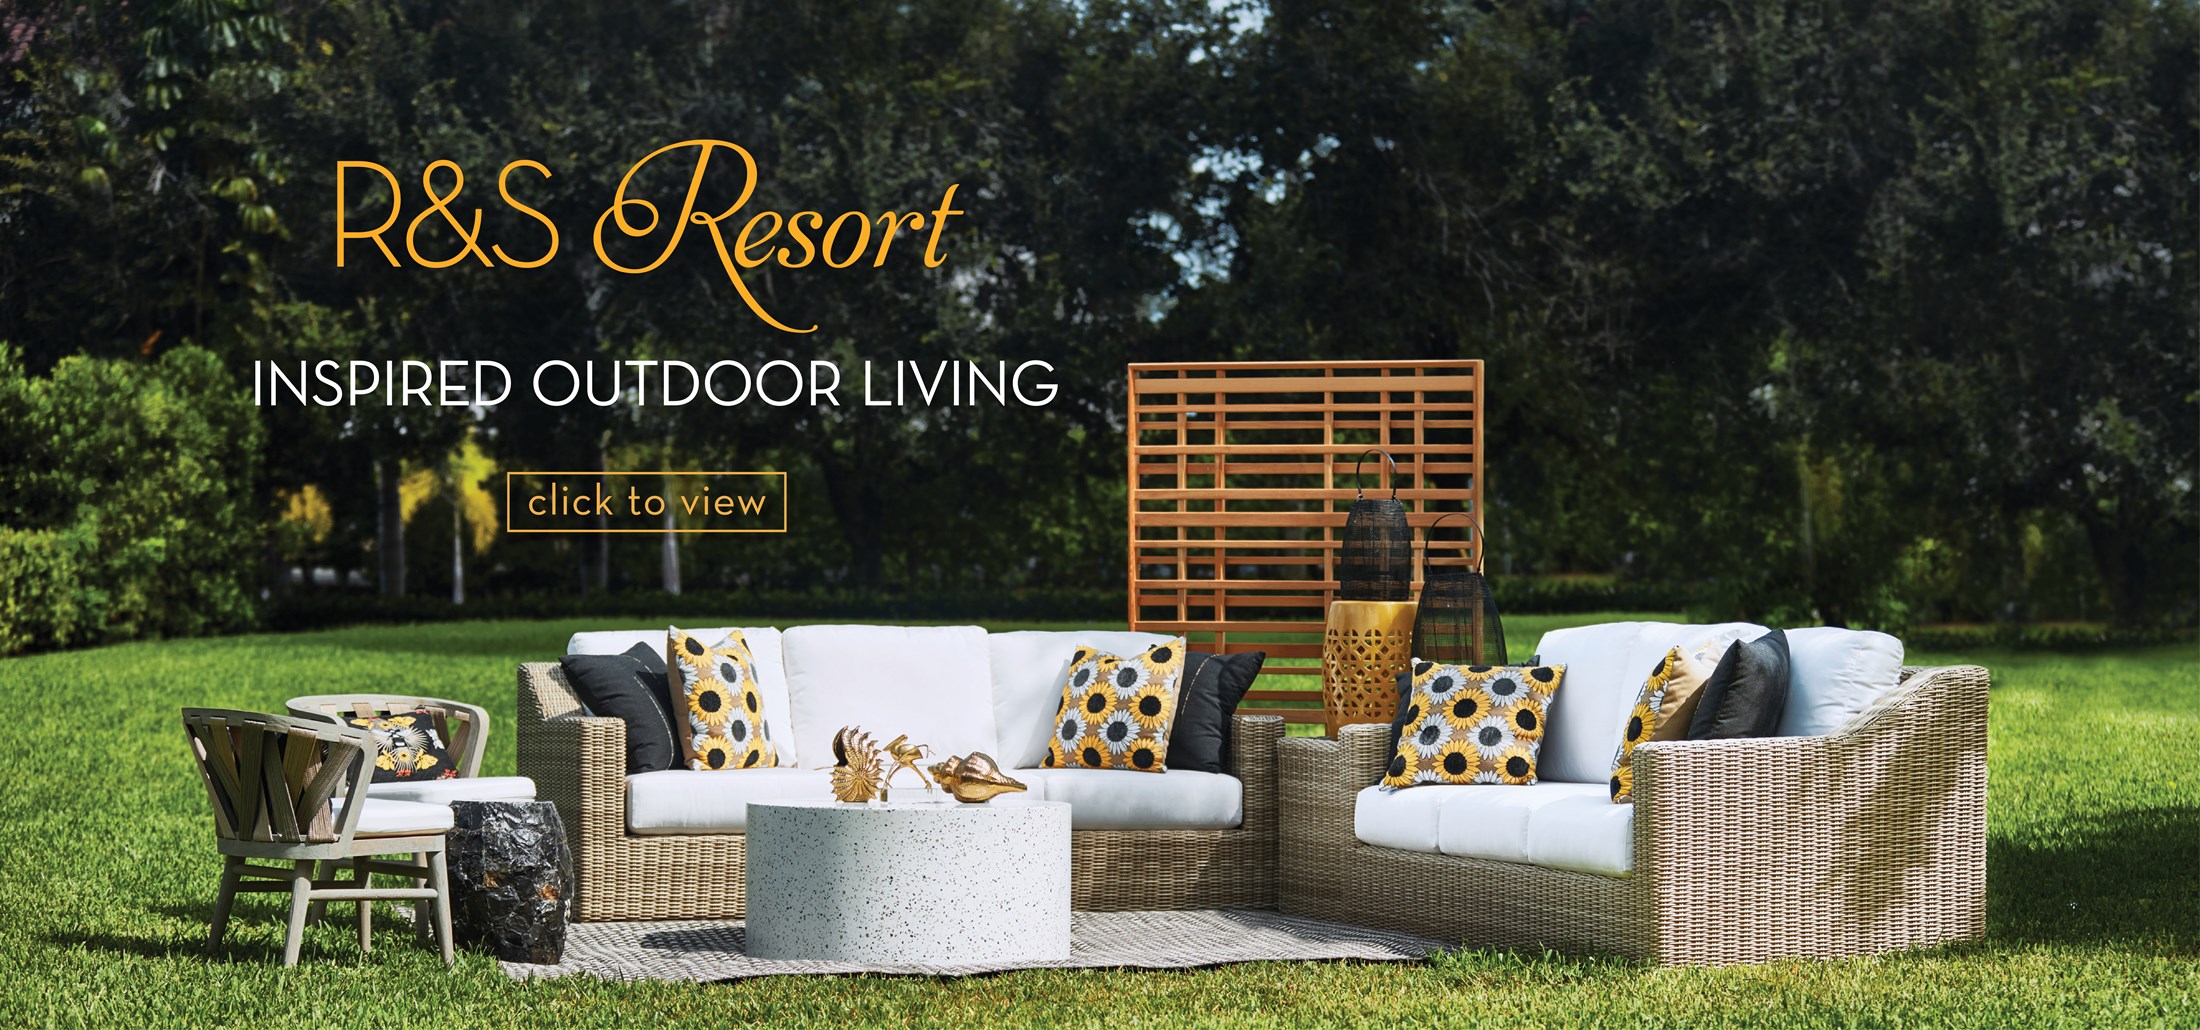 Image of outdoor furniture on a lawn. Text: R&S Resort. Inspired Outdoor Living. Click to view. Links to R&S Resort.